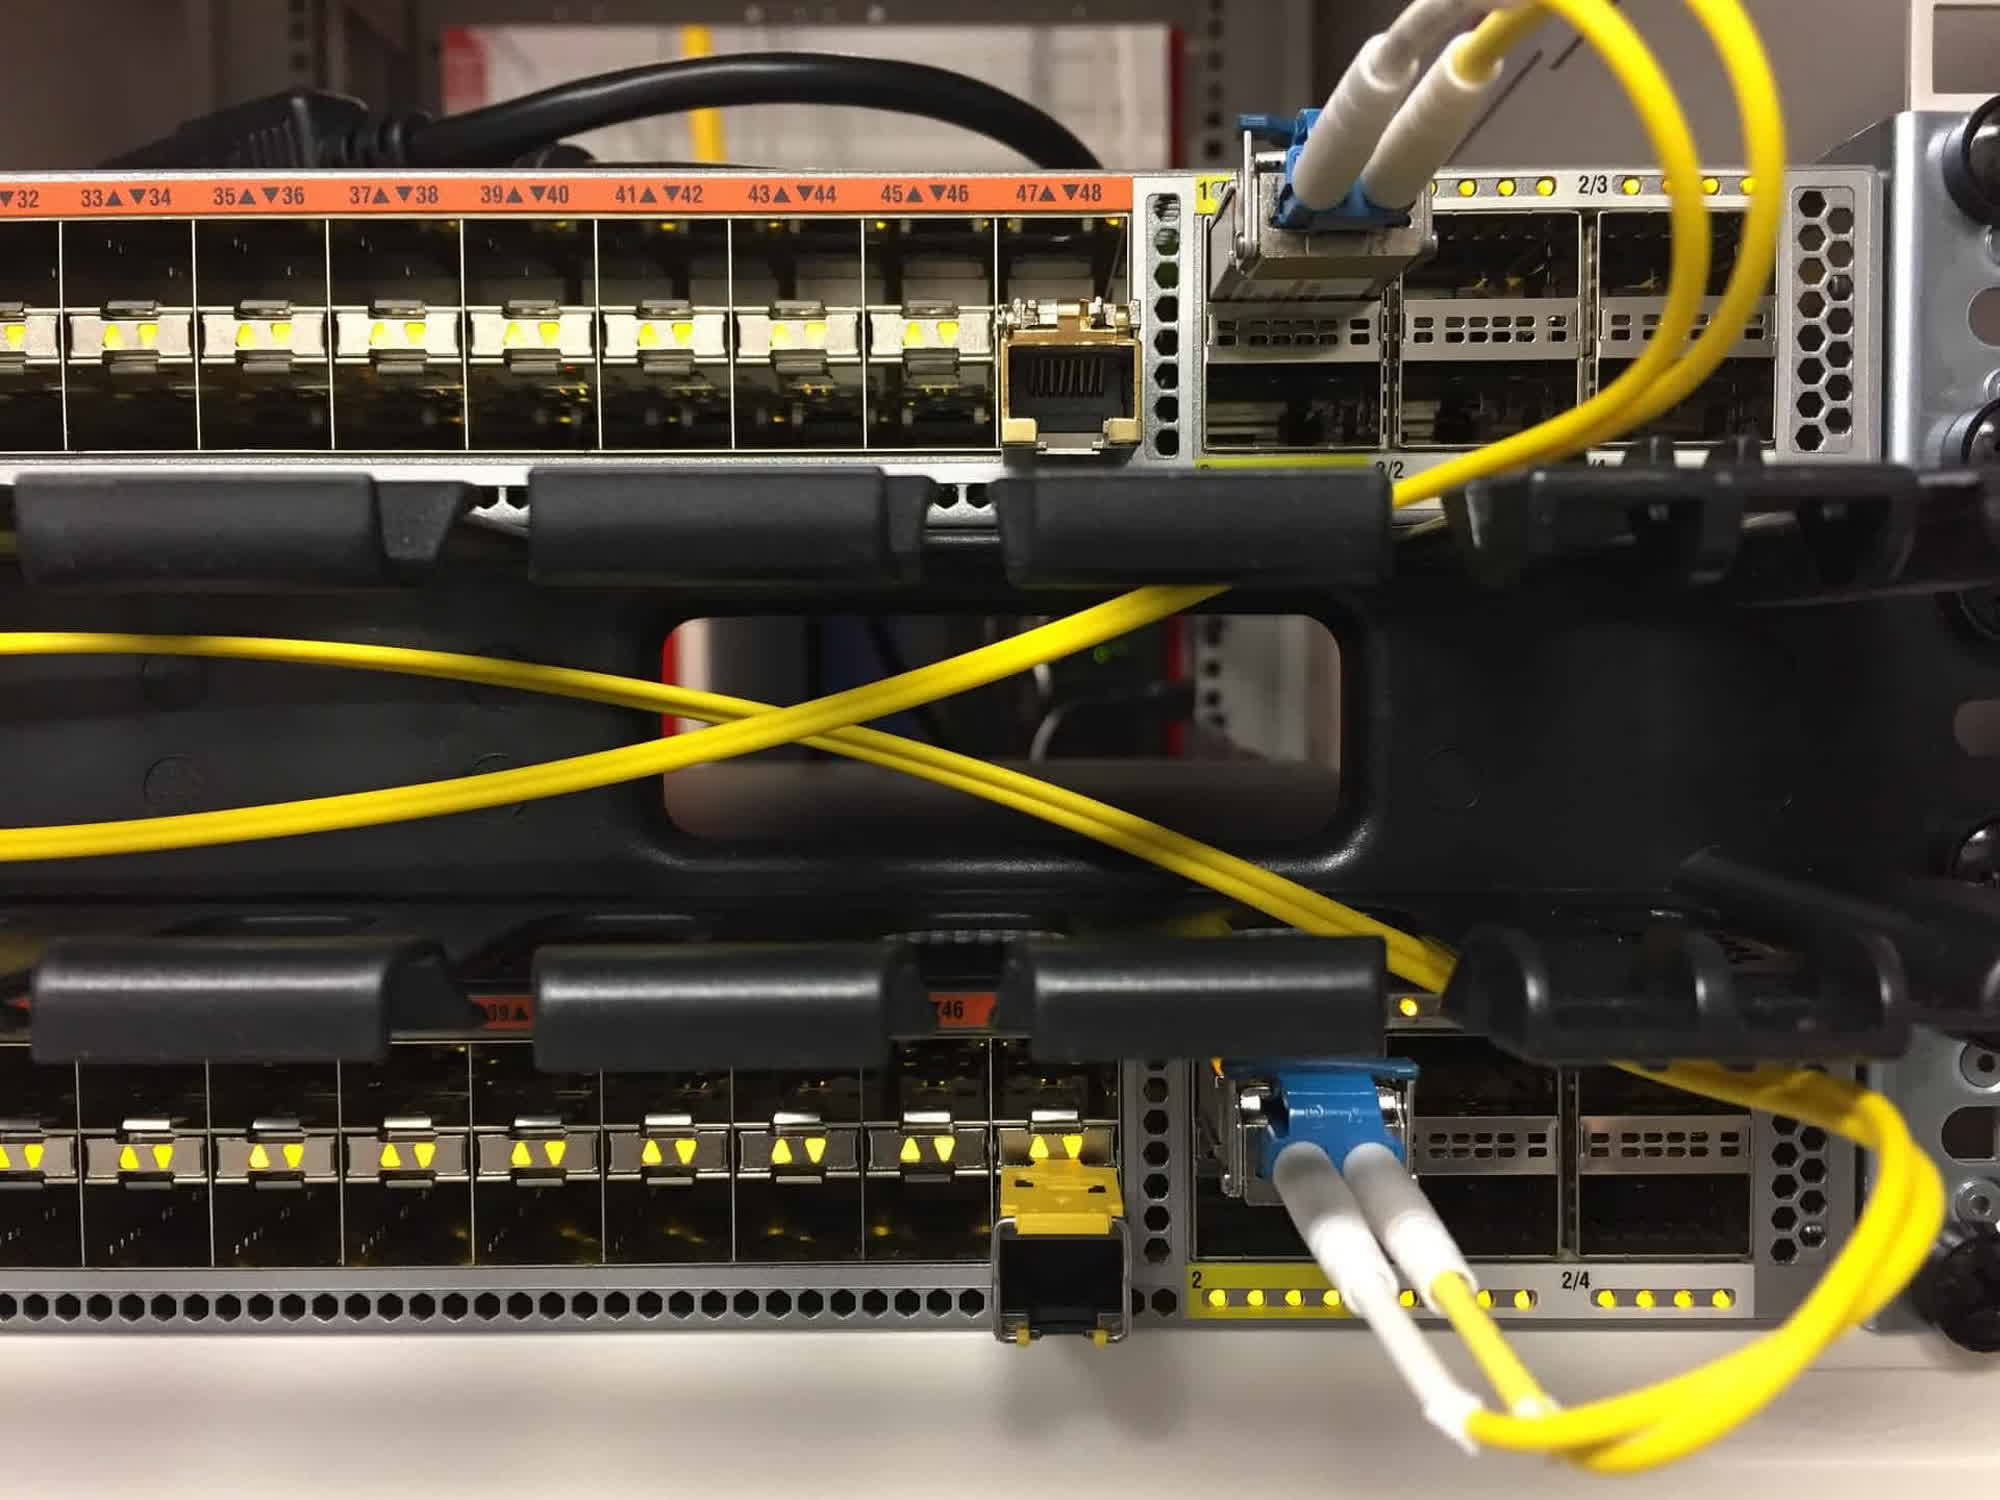 Government-sponsored Chinese hackers are hiding inside Cisco routers